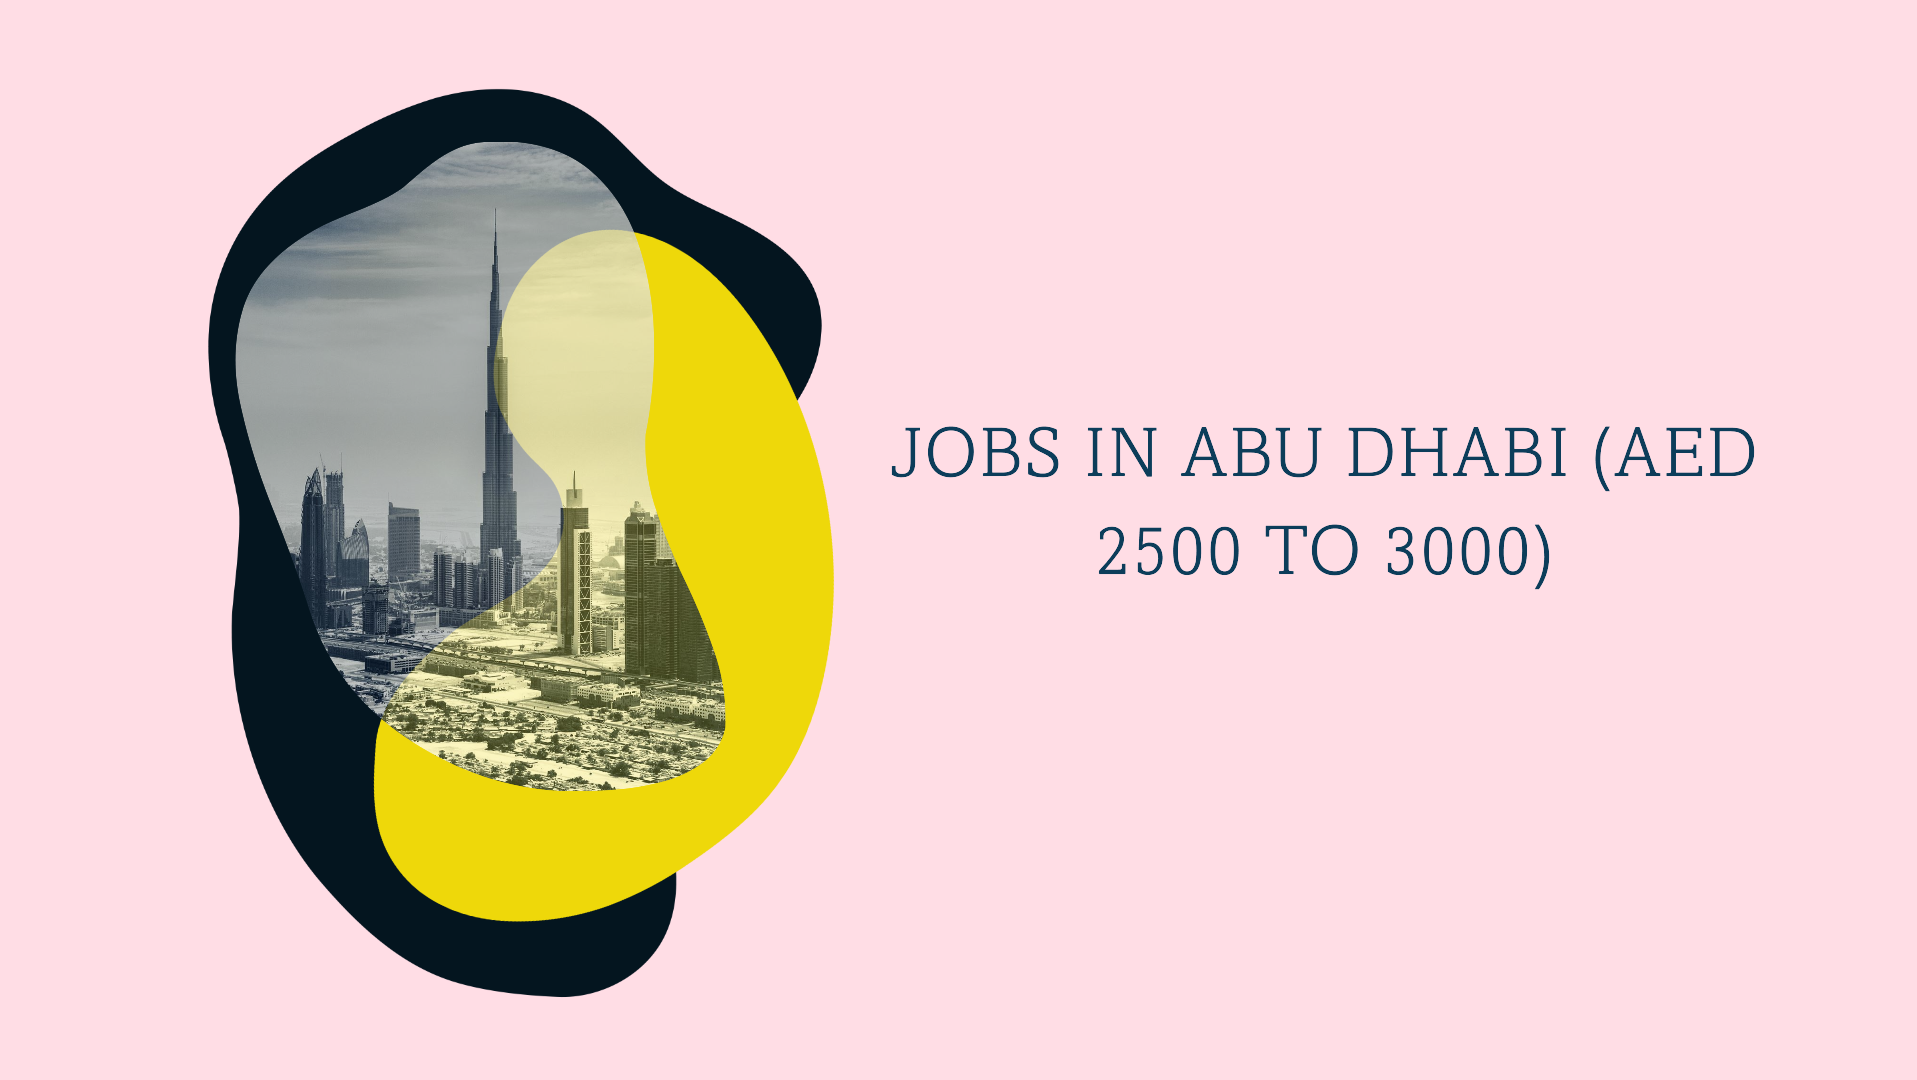 jobs in abu dhabi (AED 2500 to 3000)